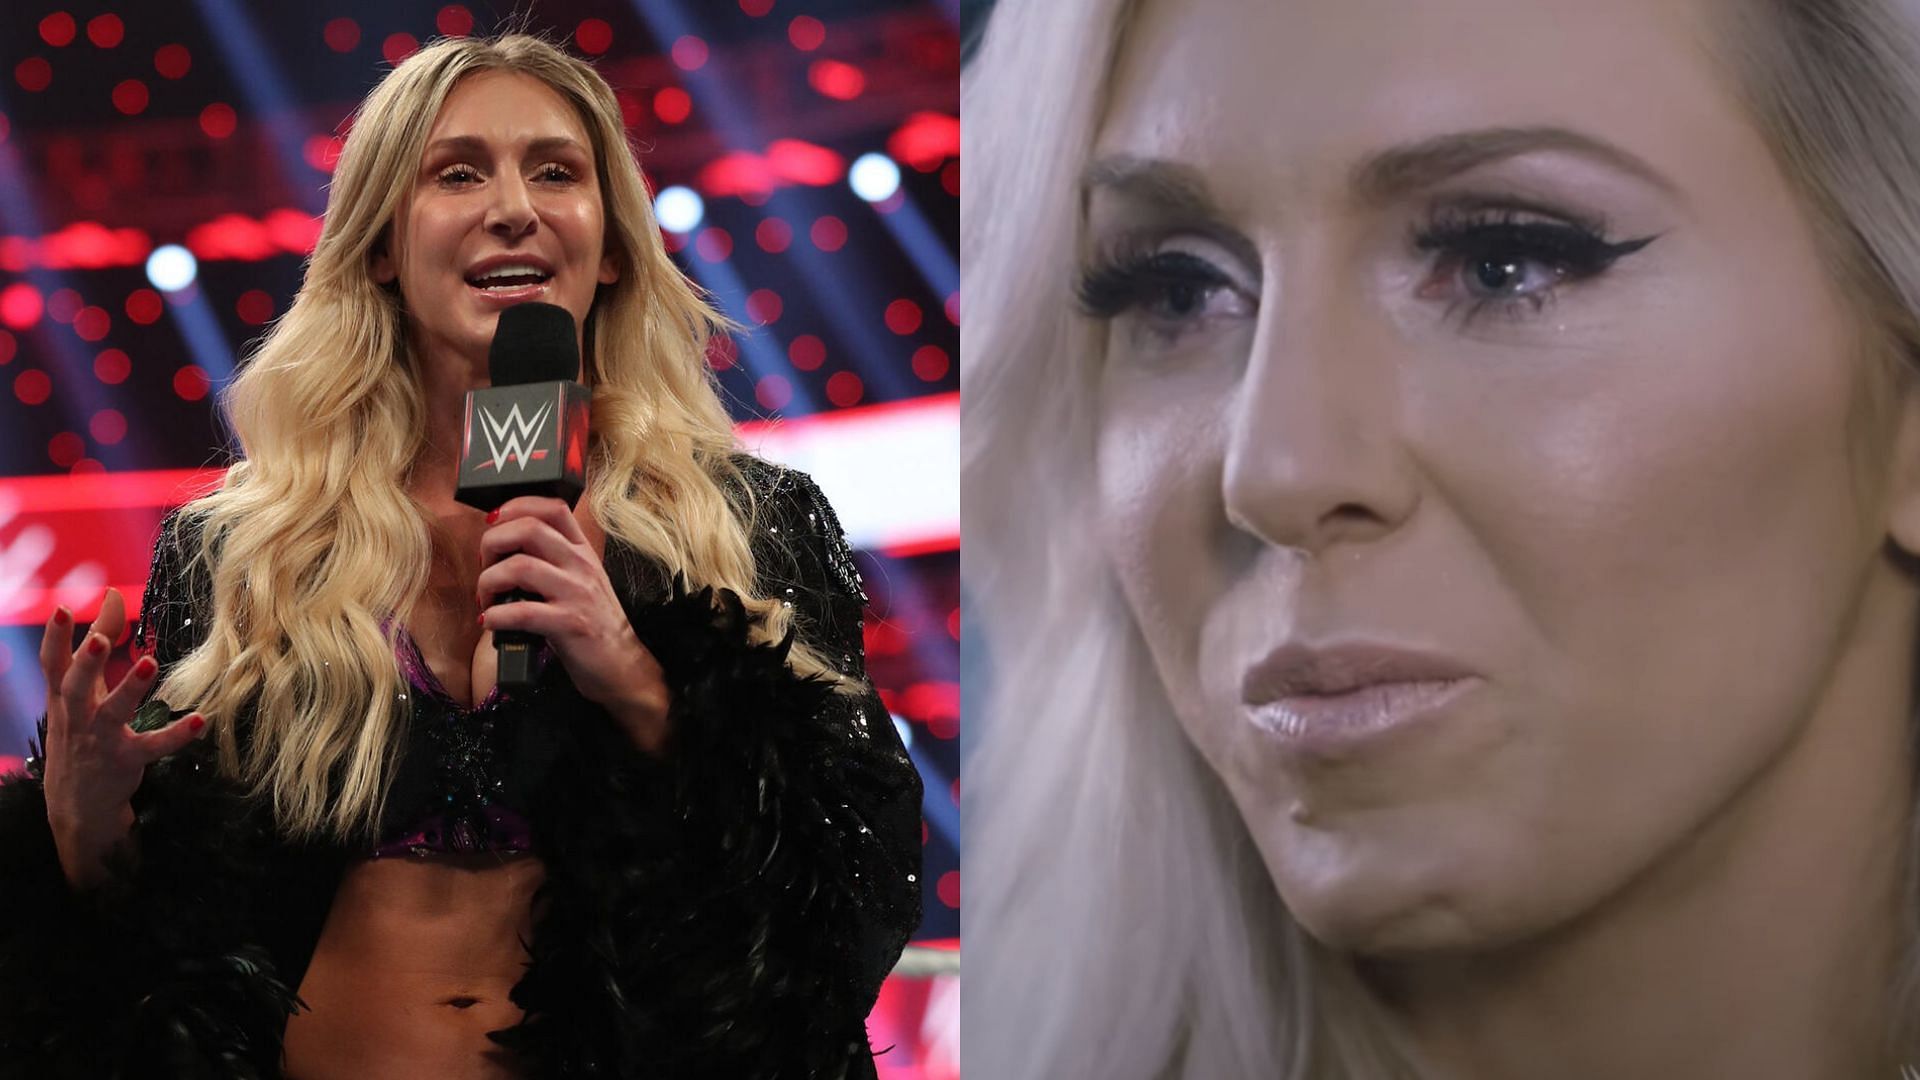 Charlotte Flair has not been seen by fans in a WWE ring since December